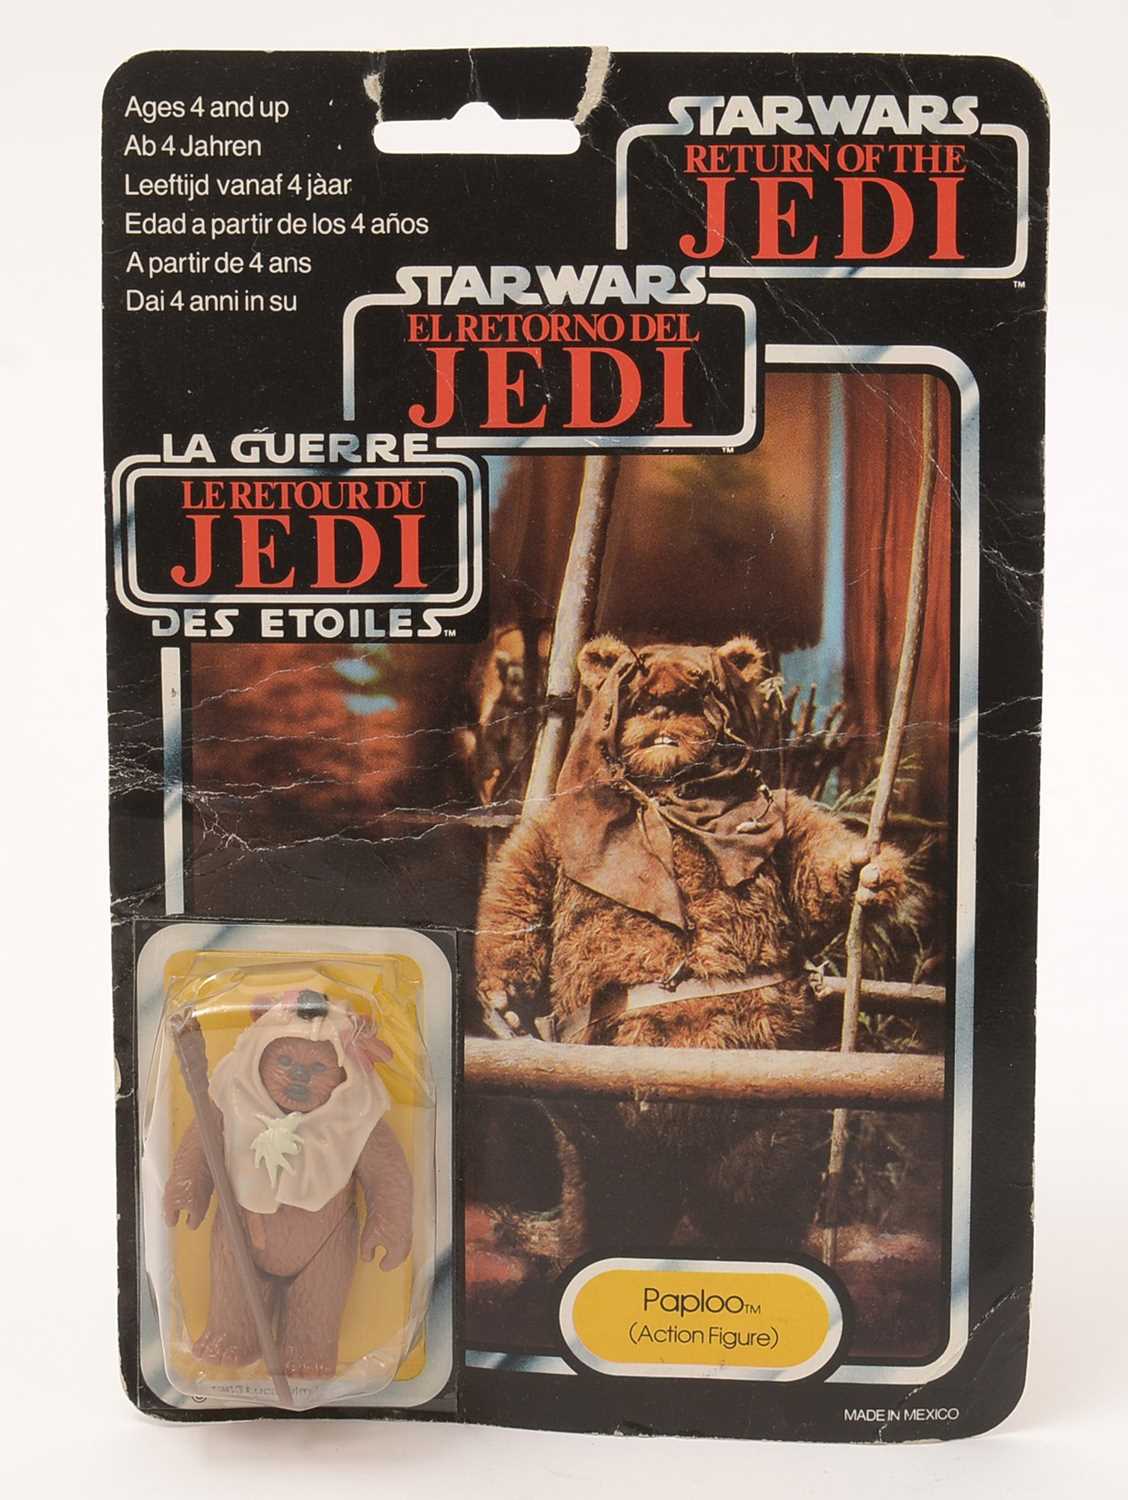 225 - Star Wars Return of the Jedi Paploo (Action Figure) carded figure, 